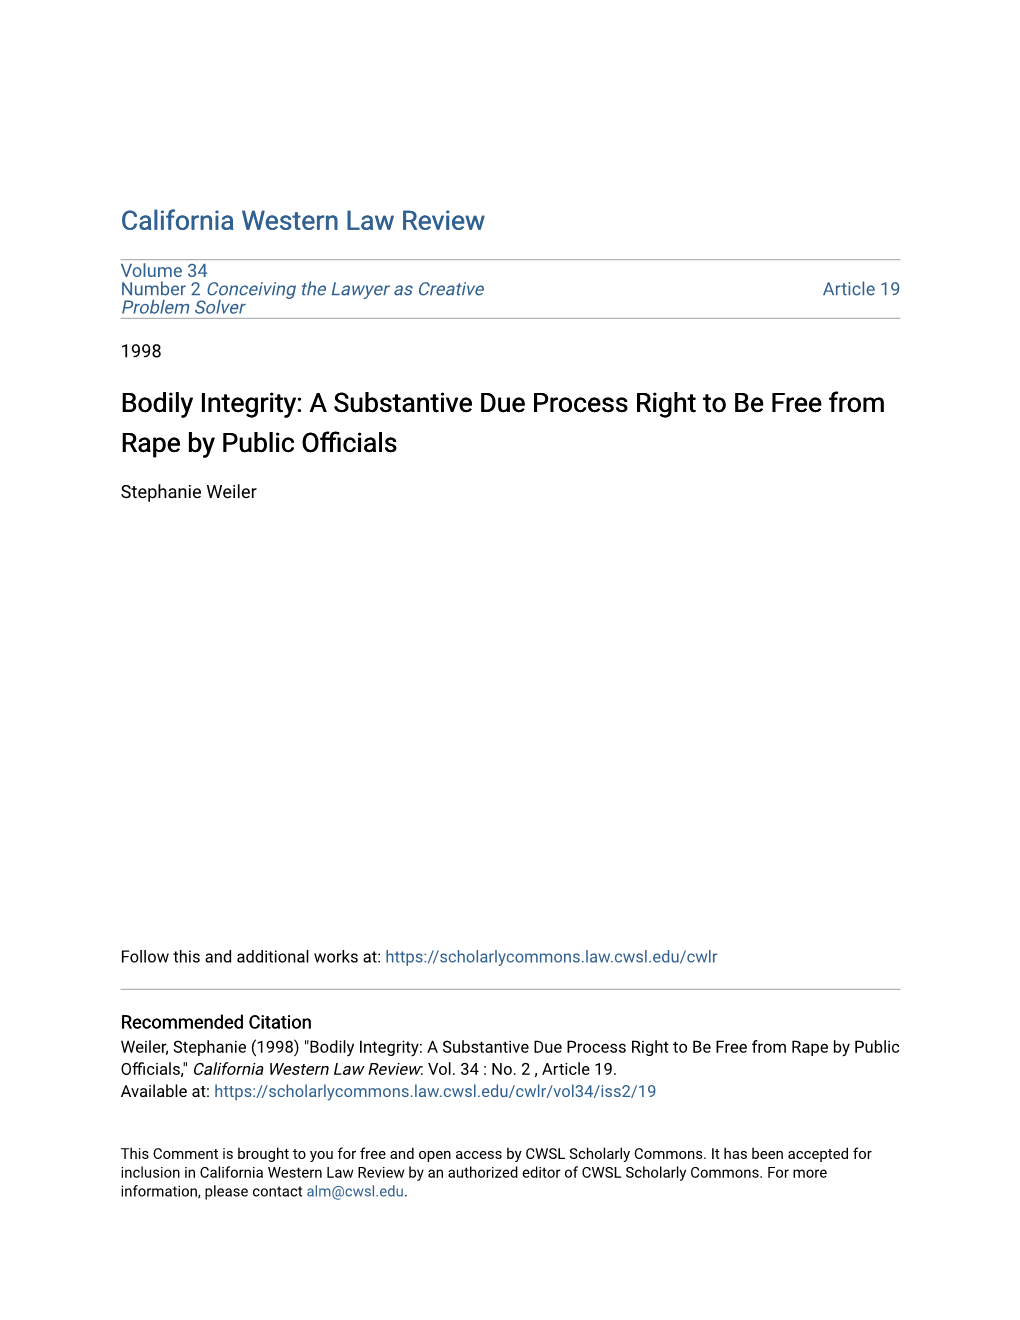 Bodily Integrity: a Substantive Due Process Right to Be Free from Rape by Public Officials